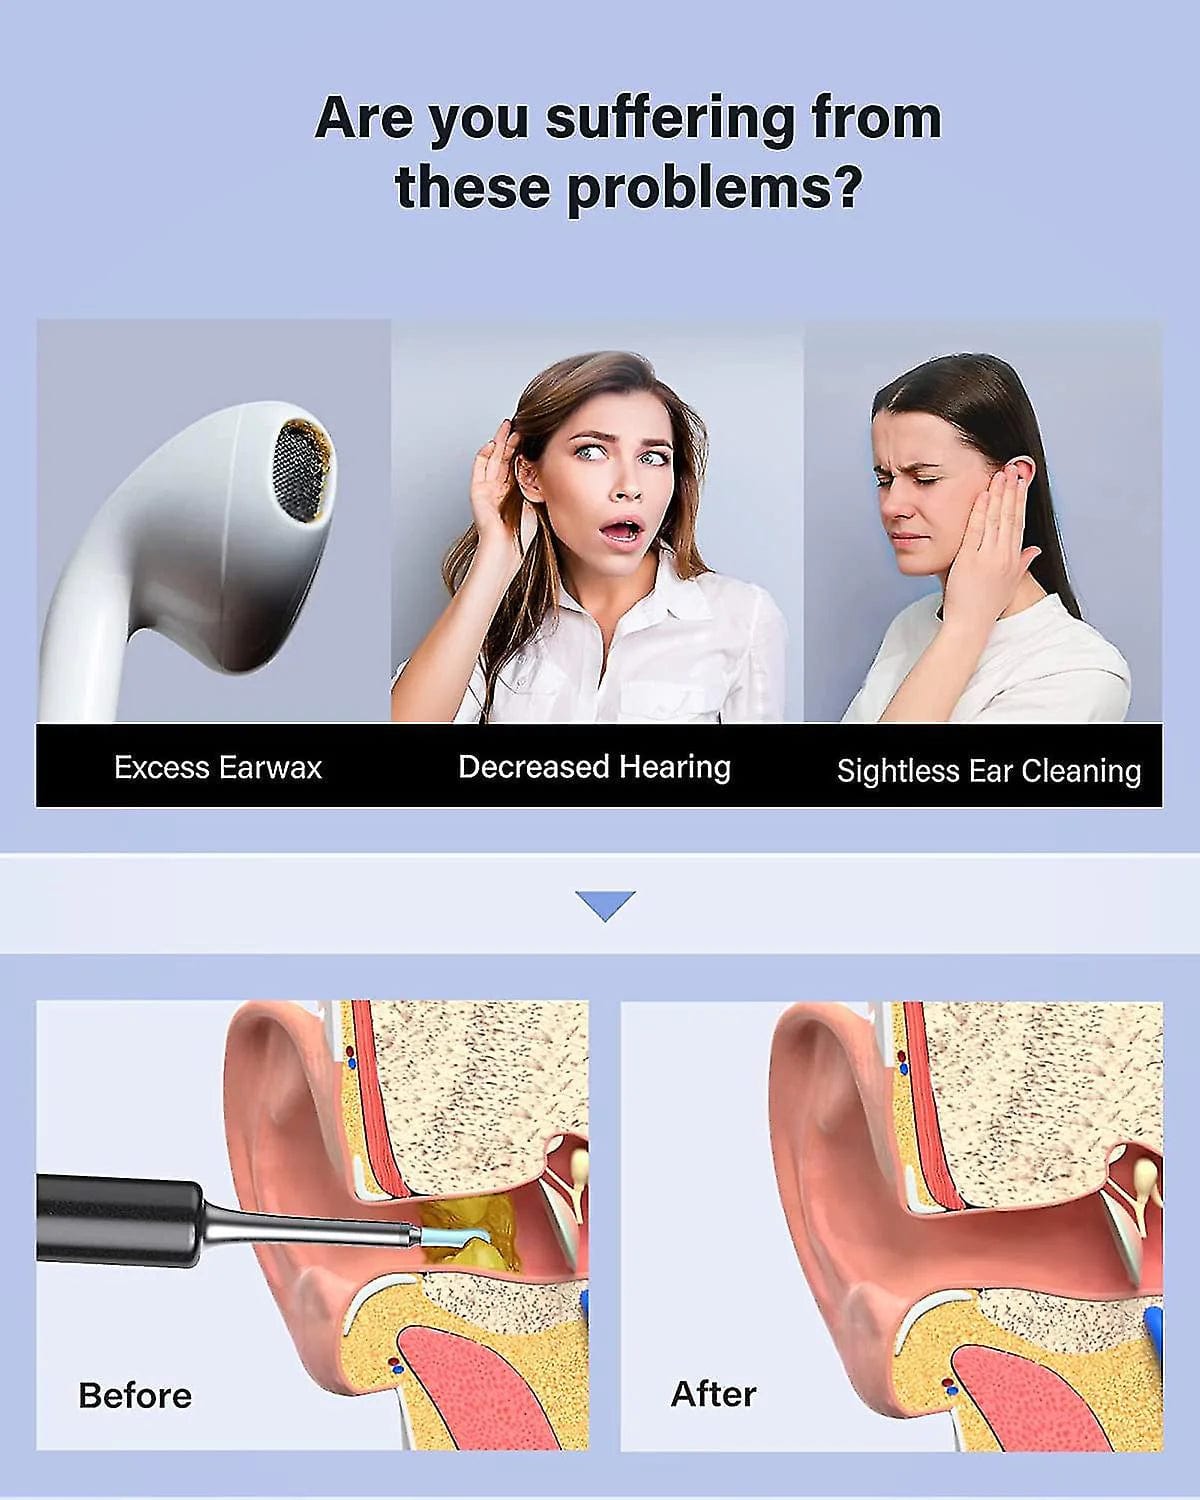 Ear Wax Remover Endoscope - EarView